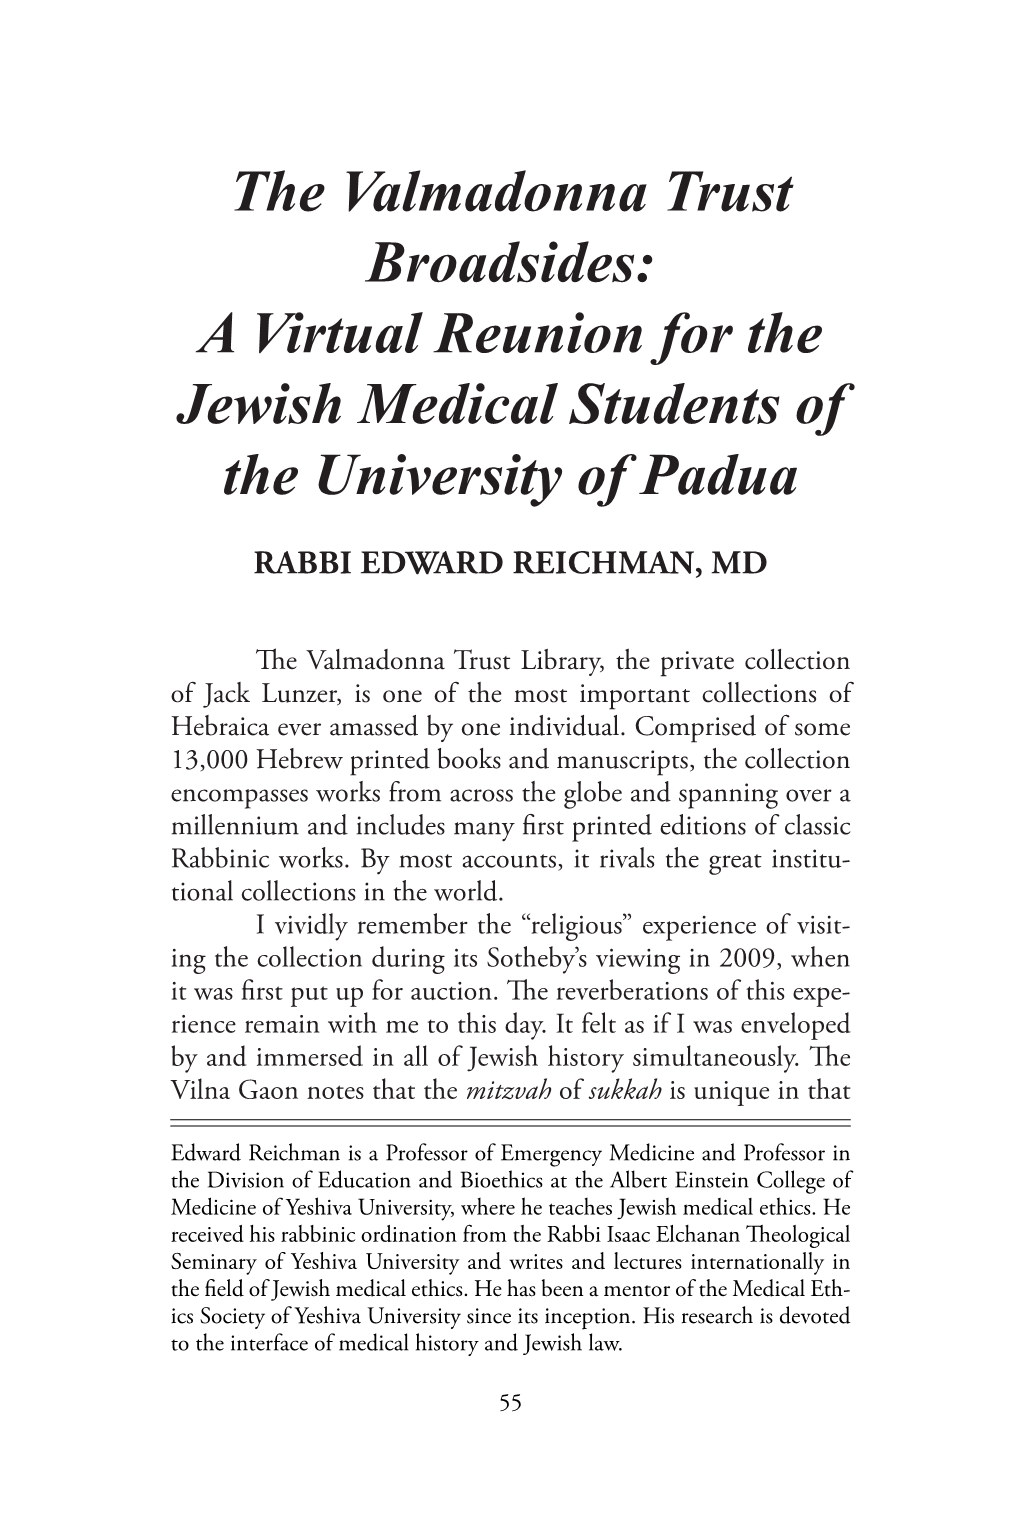 The Valmadonna Trust Broadsides: a Virtual Reunion for the Jewish Medical Students of the University of Padua